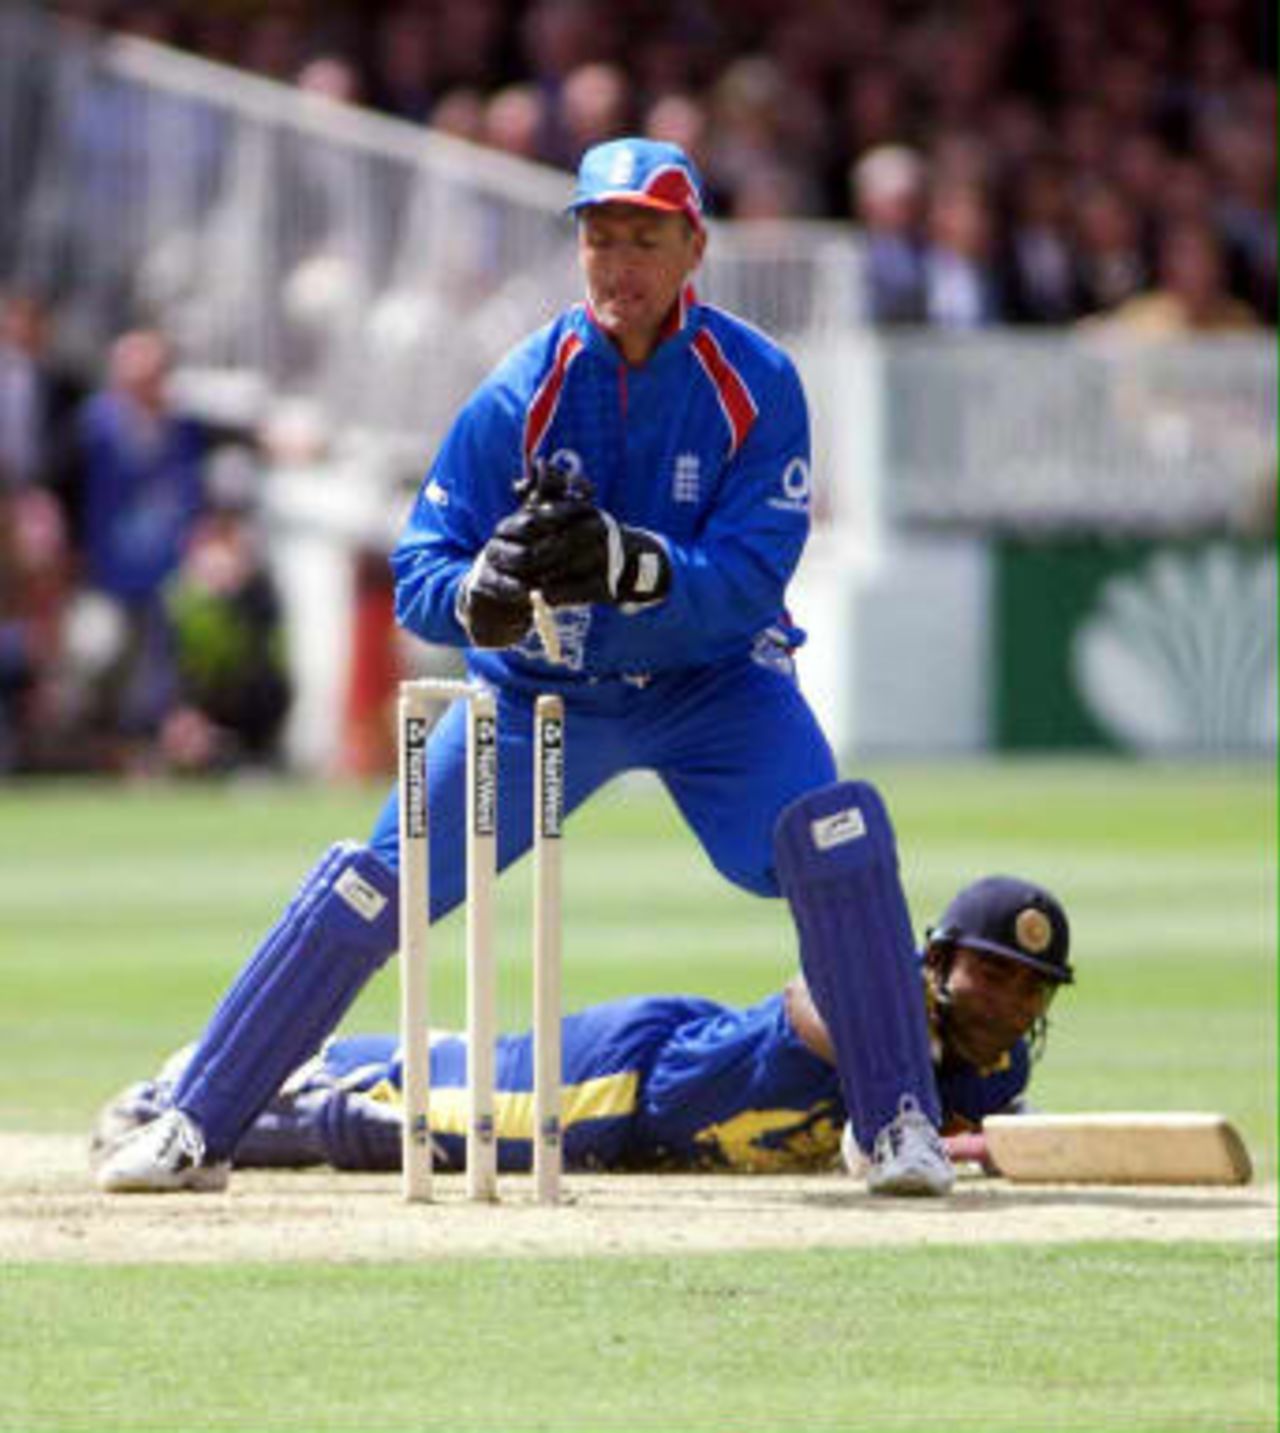 Sri Lankan batsman Romesh Kaluwitharana narrowly escapes England's wicketkeeper Alec Stewart running him out on 48, during their opening Cricket World Cup match against Sri Lanka at Lord's 14 May 1999.  Kaluwitharana was later out for 52, caught Stewart.